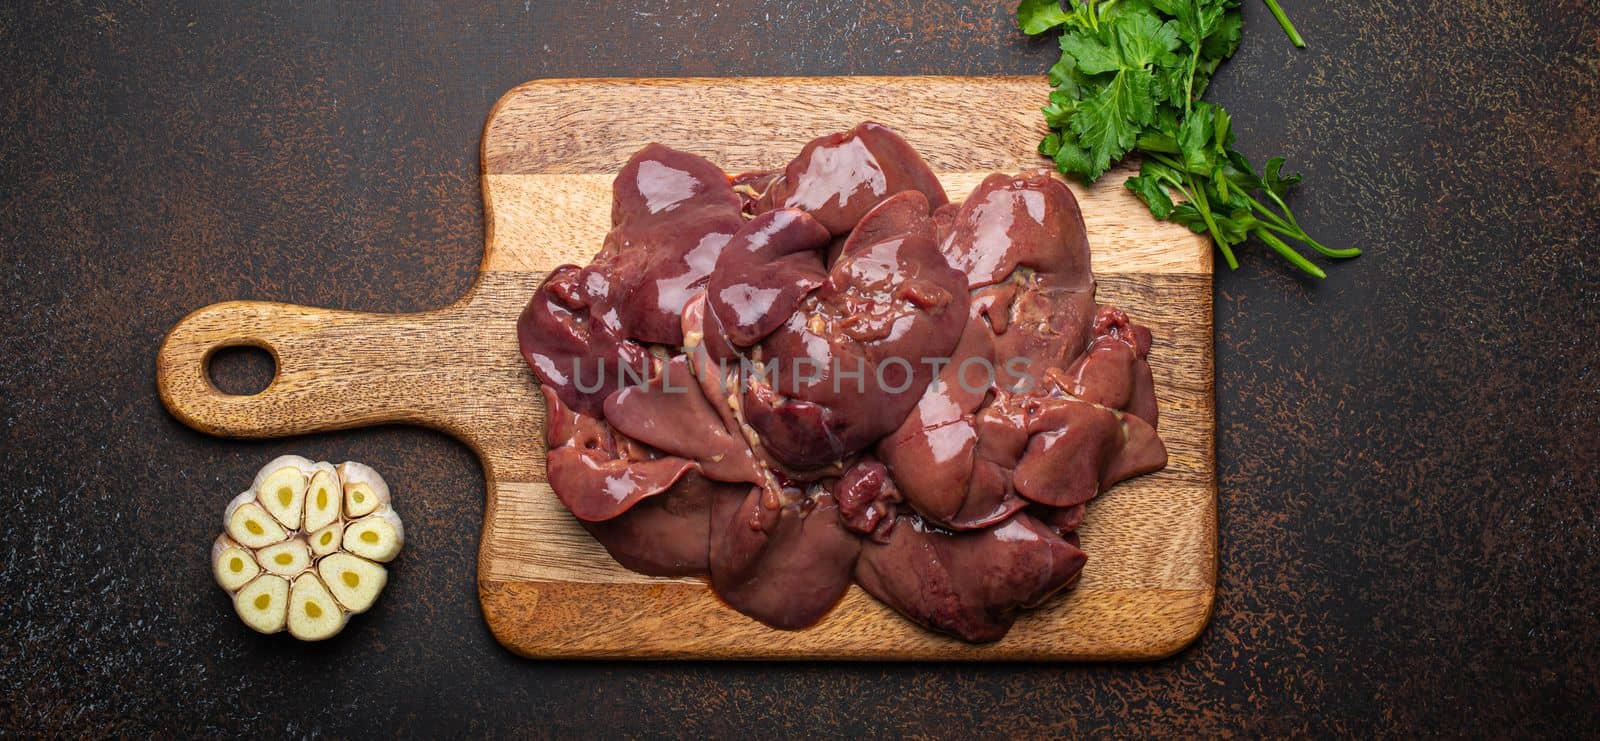 Raw chicken liver on wooden cutting board top view on dark rustic concrete background kitchen table with parsley and garlic. Healthy food ingredient, source of iron, folate, vitamins, minerals by its_al_dente